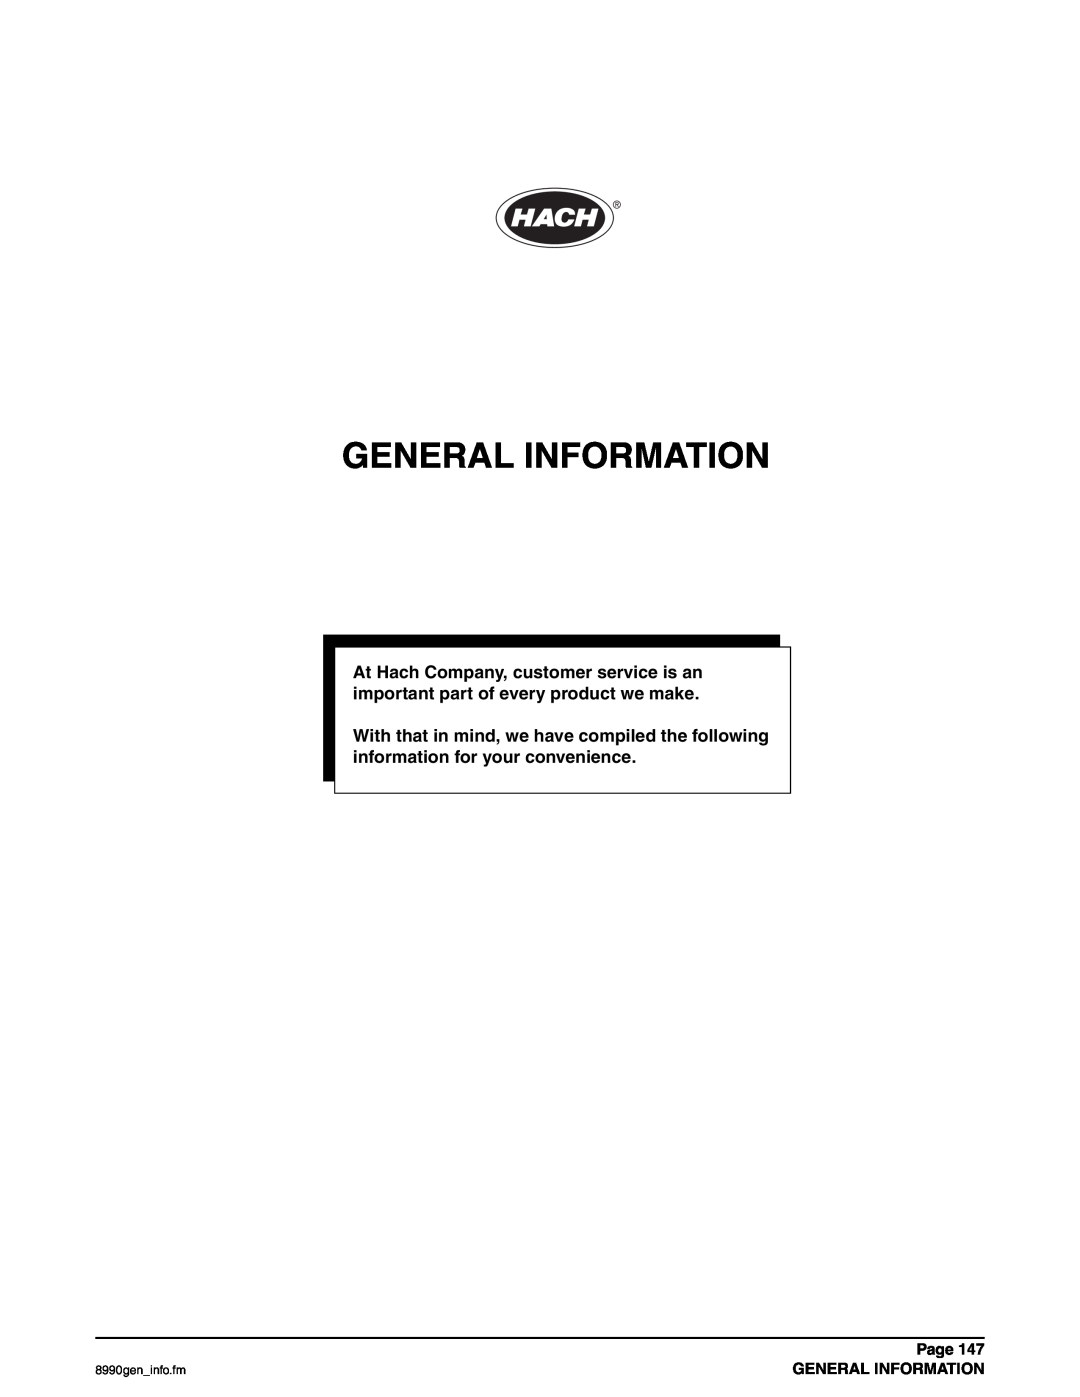 Hach 900 MAX manual General Information, Page 